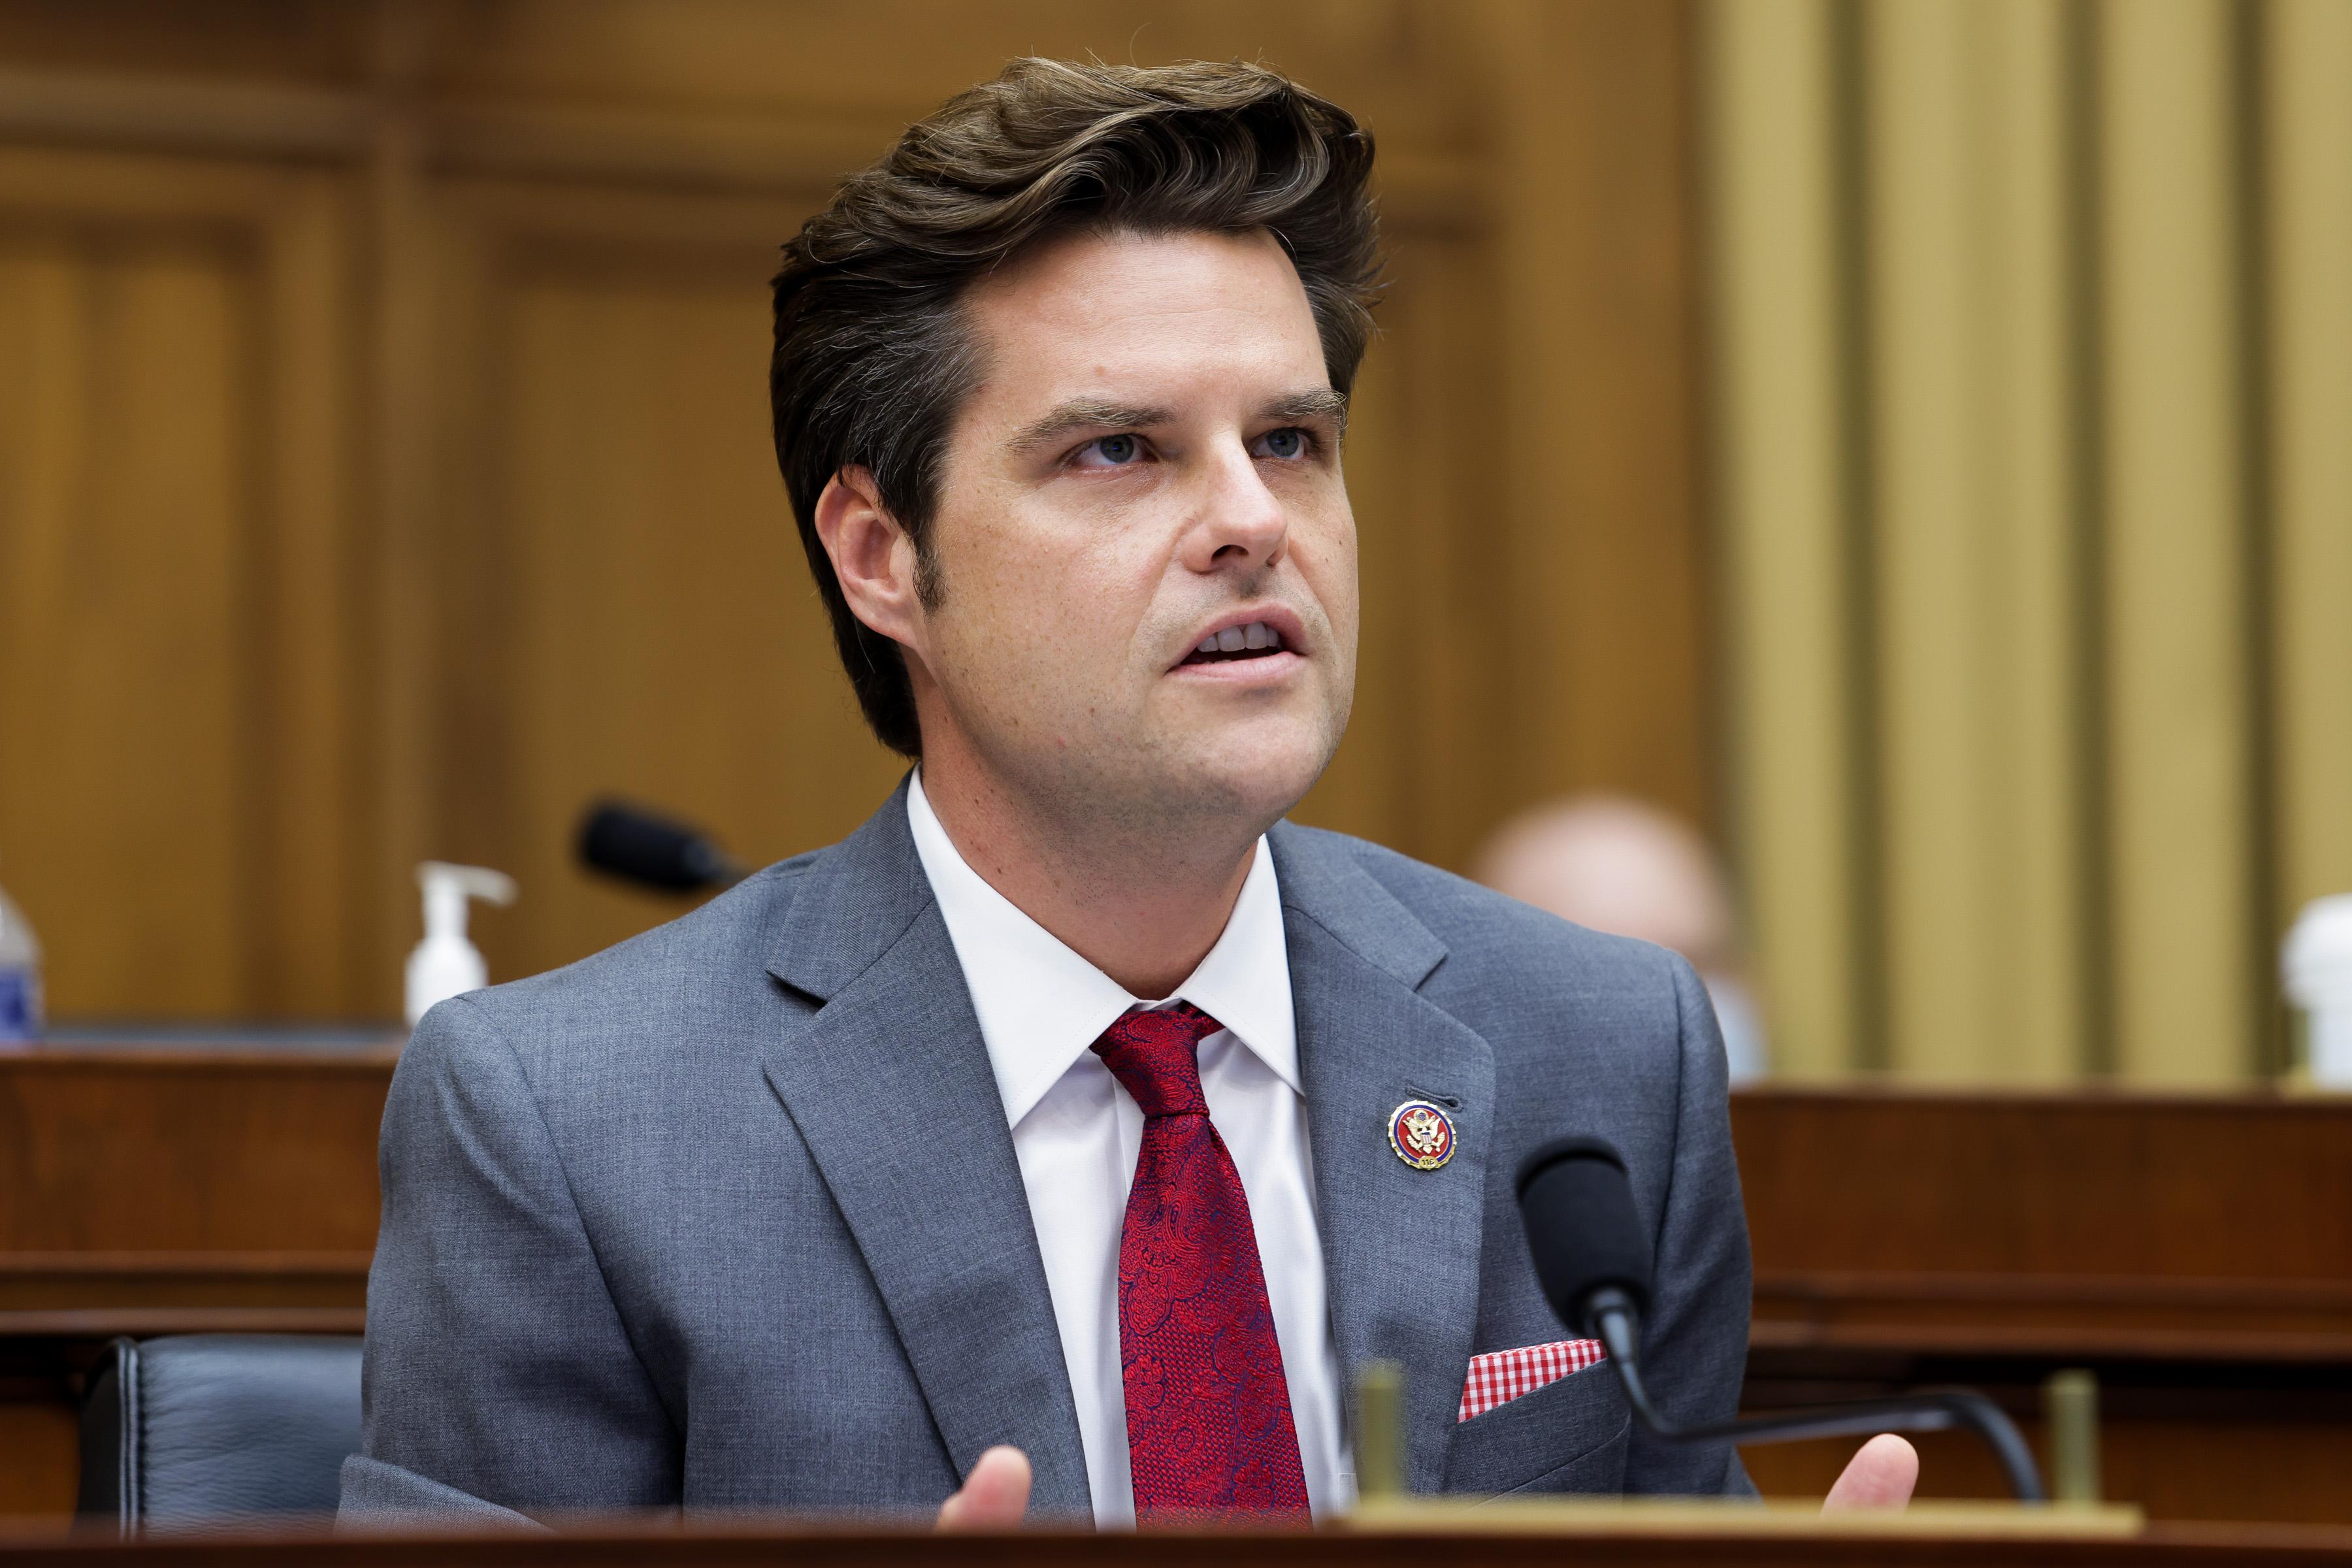 A man in a suit, tie, and congressional pin speaks in front of a microphone.